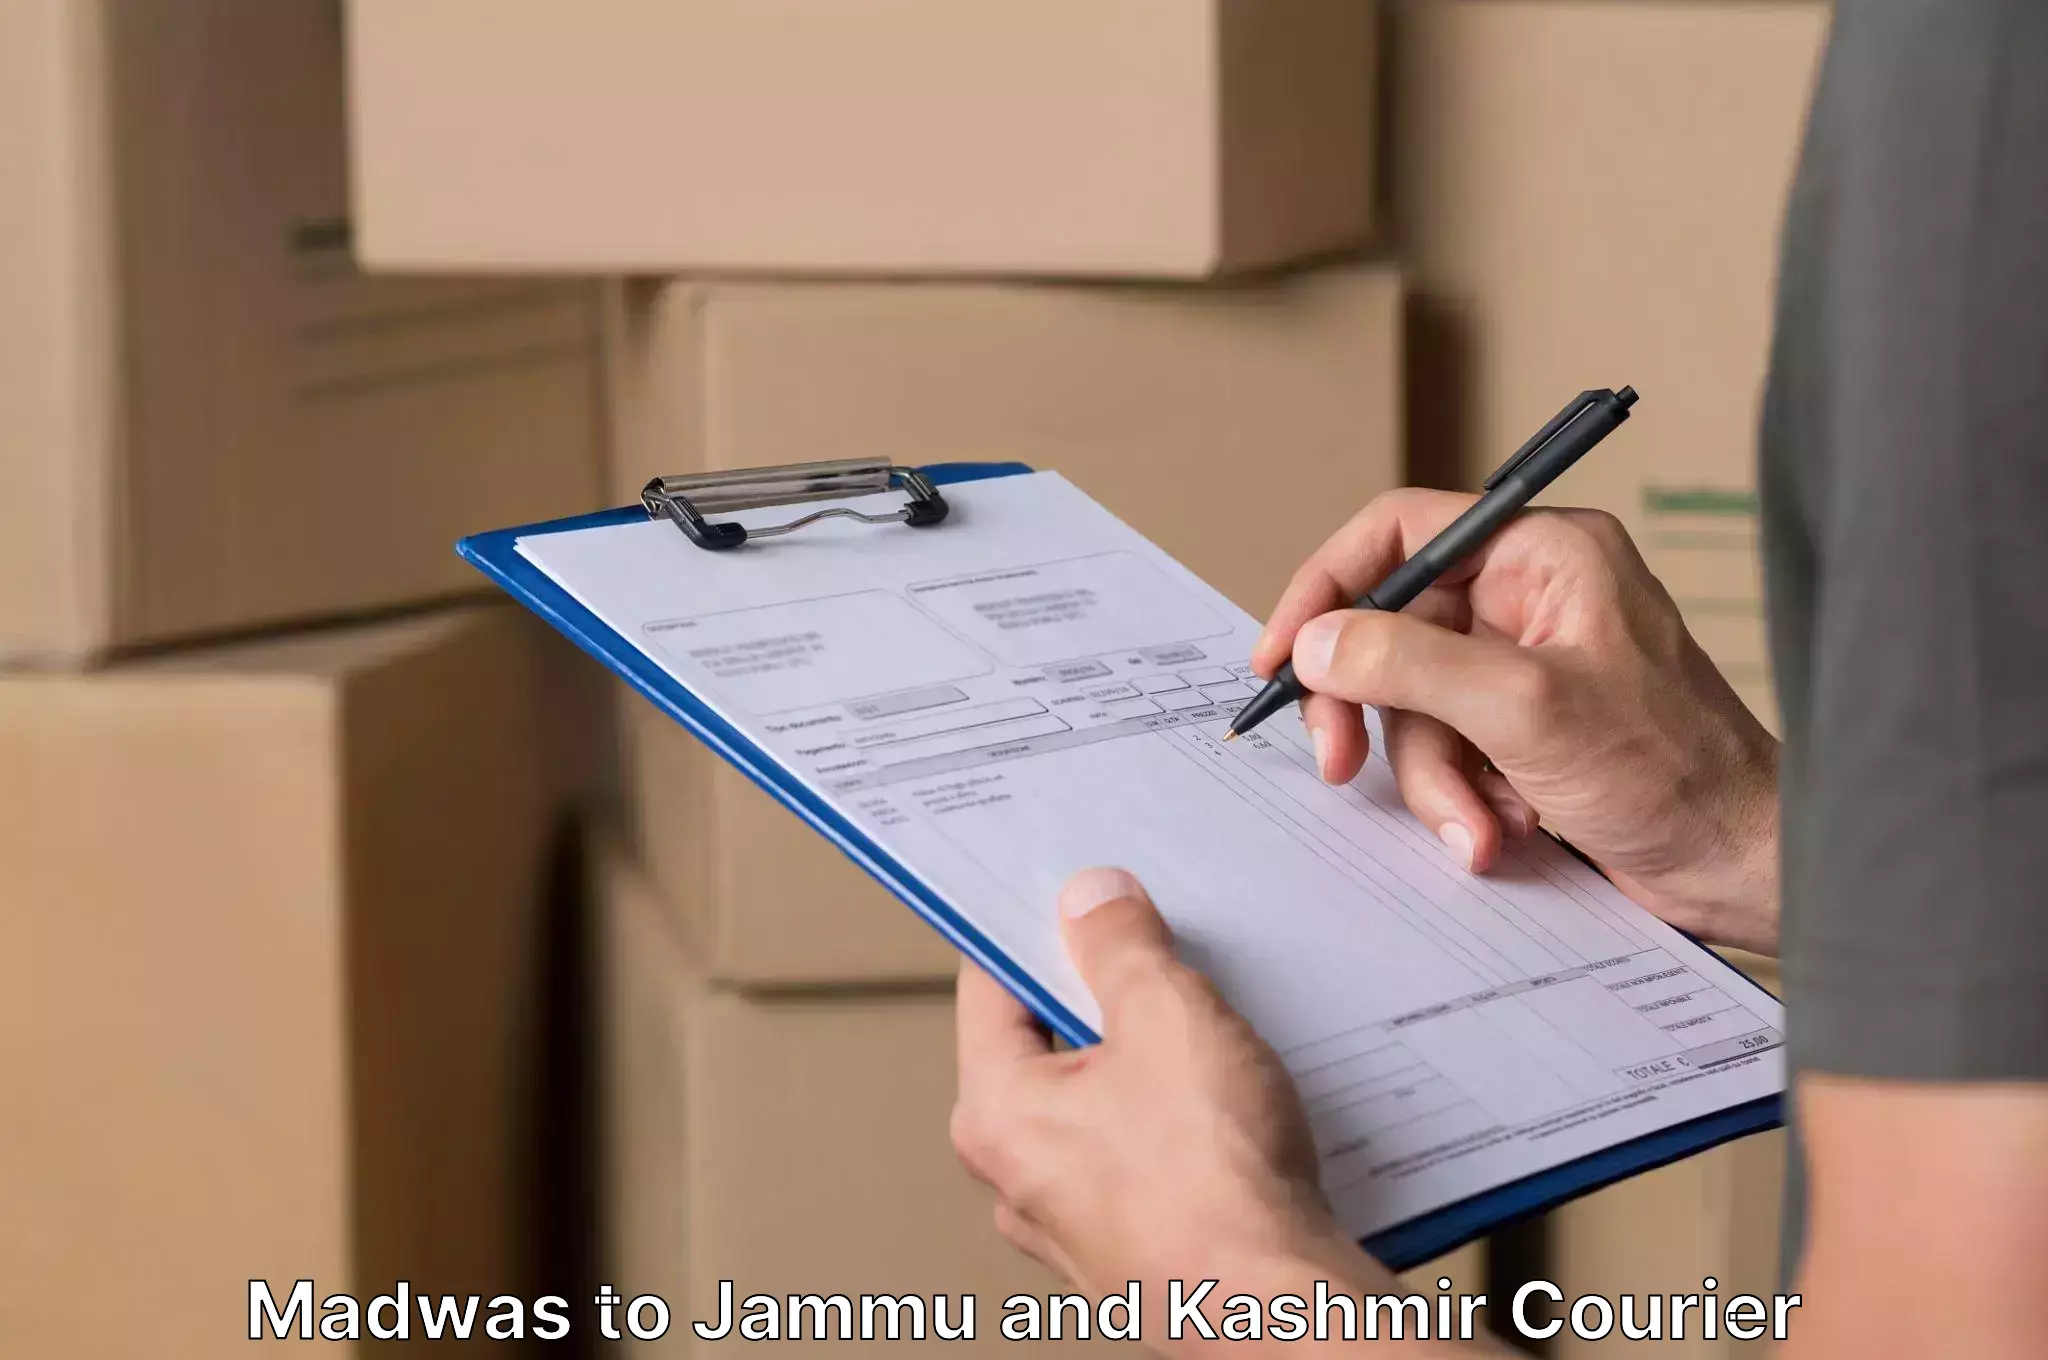 Furniture transport and storage in Madwas to Jammu and Kashmir